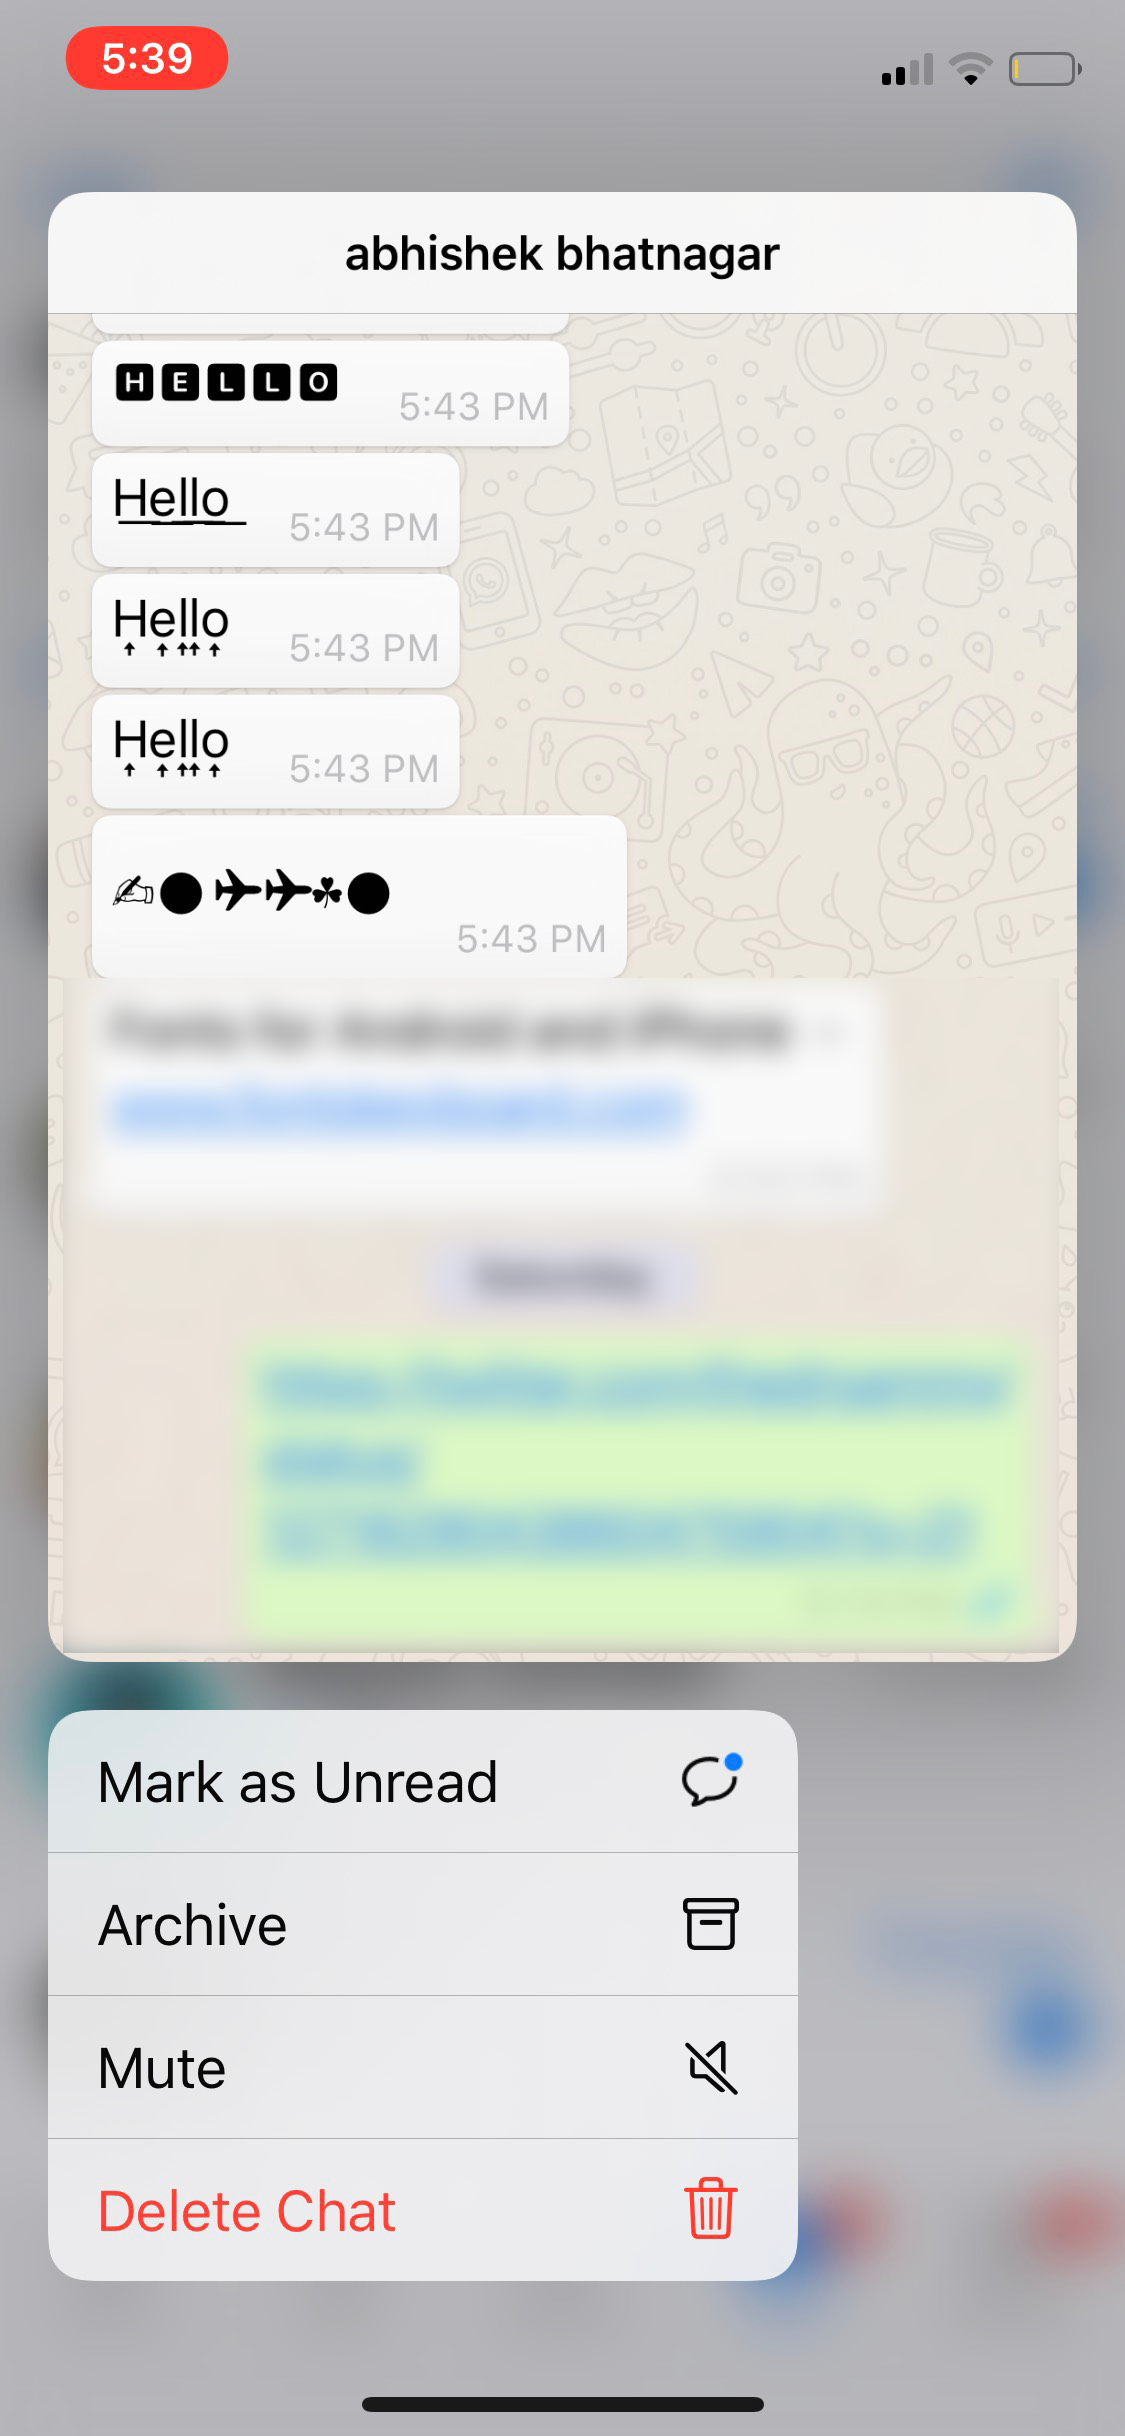 Read Whatsapp Messages on iPhone without Blue Ticks